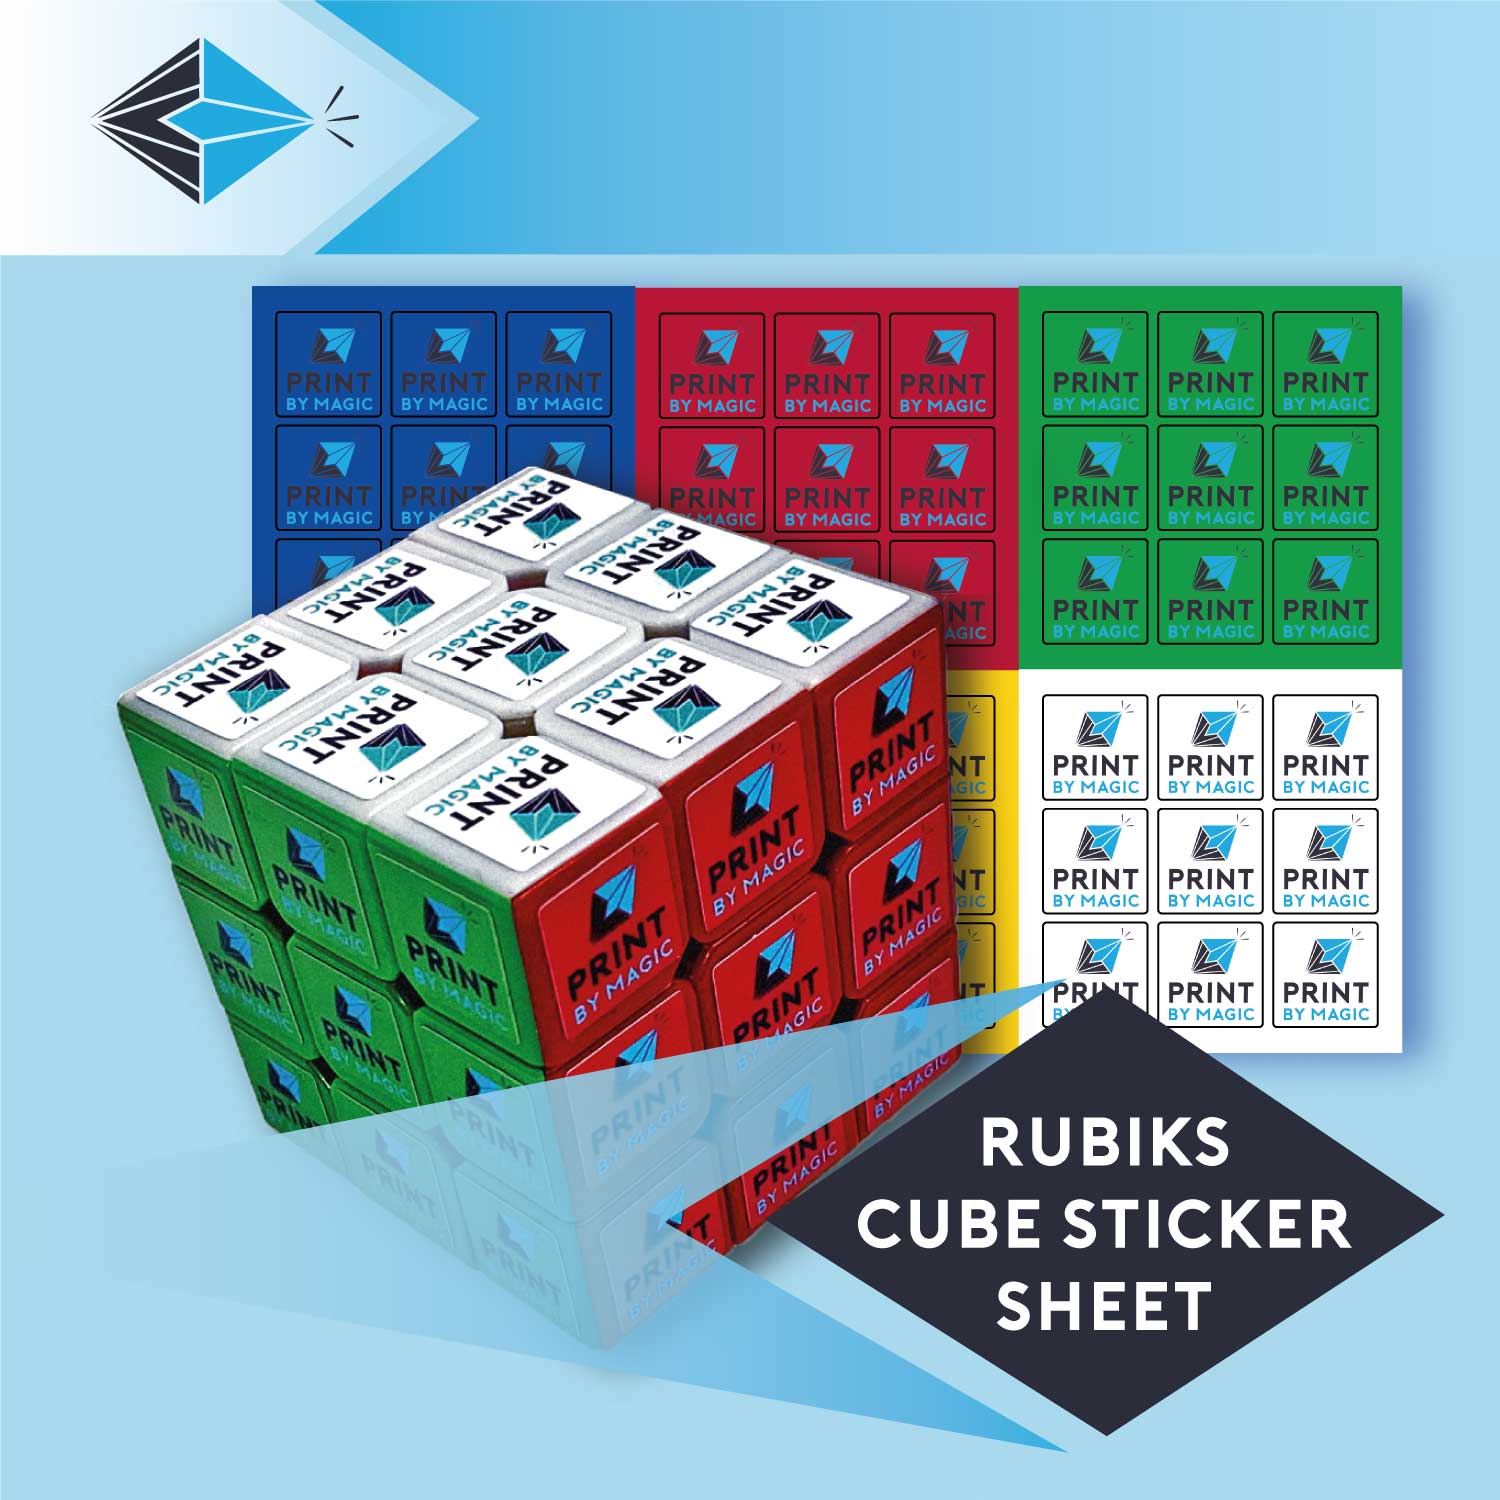 Rubiks Cube Stciker Printing Sticker Sheets Gifts Stockport